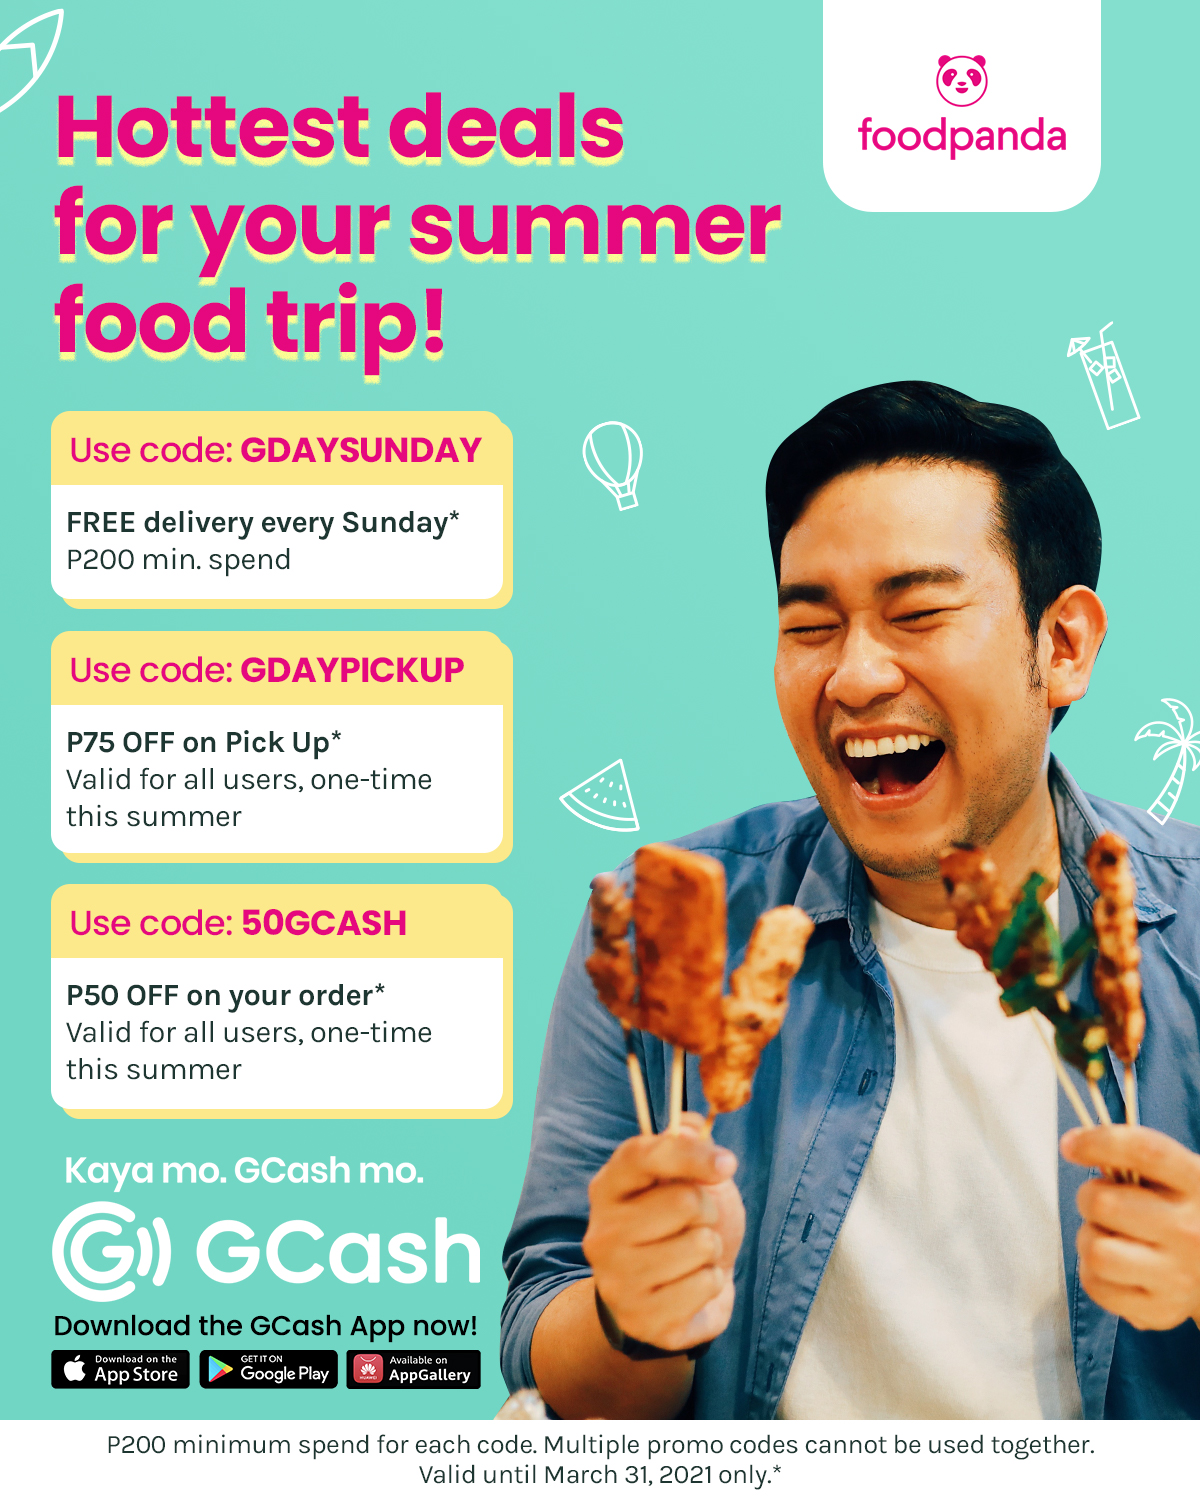 Enjoy vouchers galore when you use GCash  on foodpanda this March!